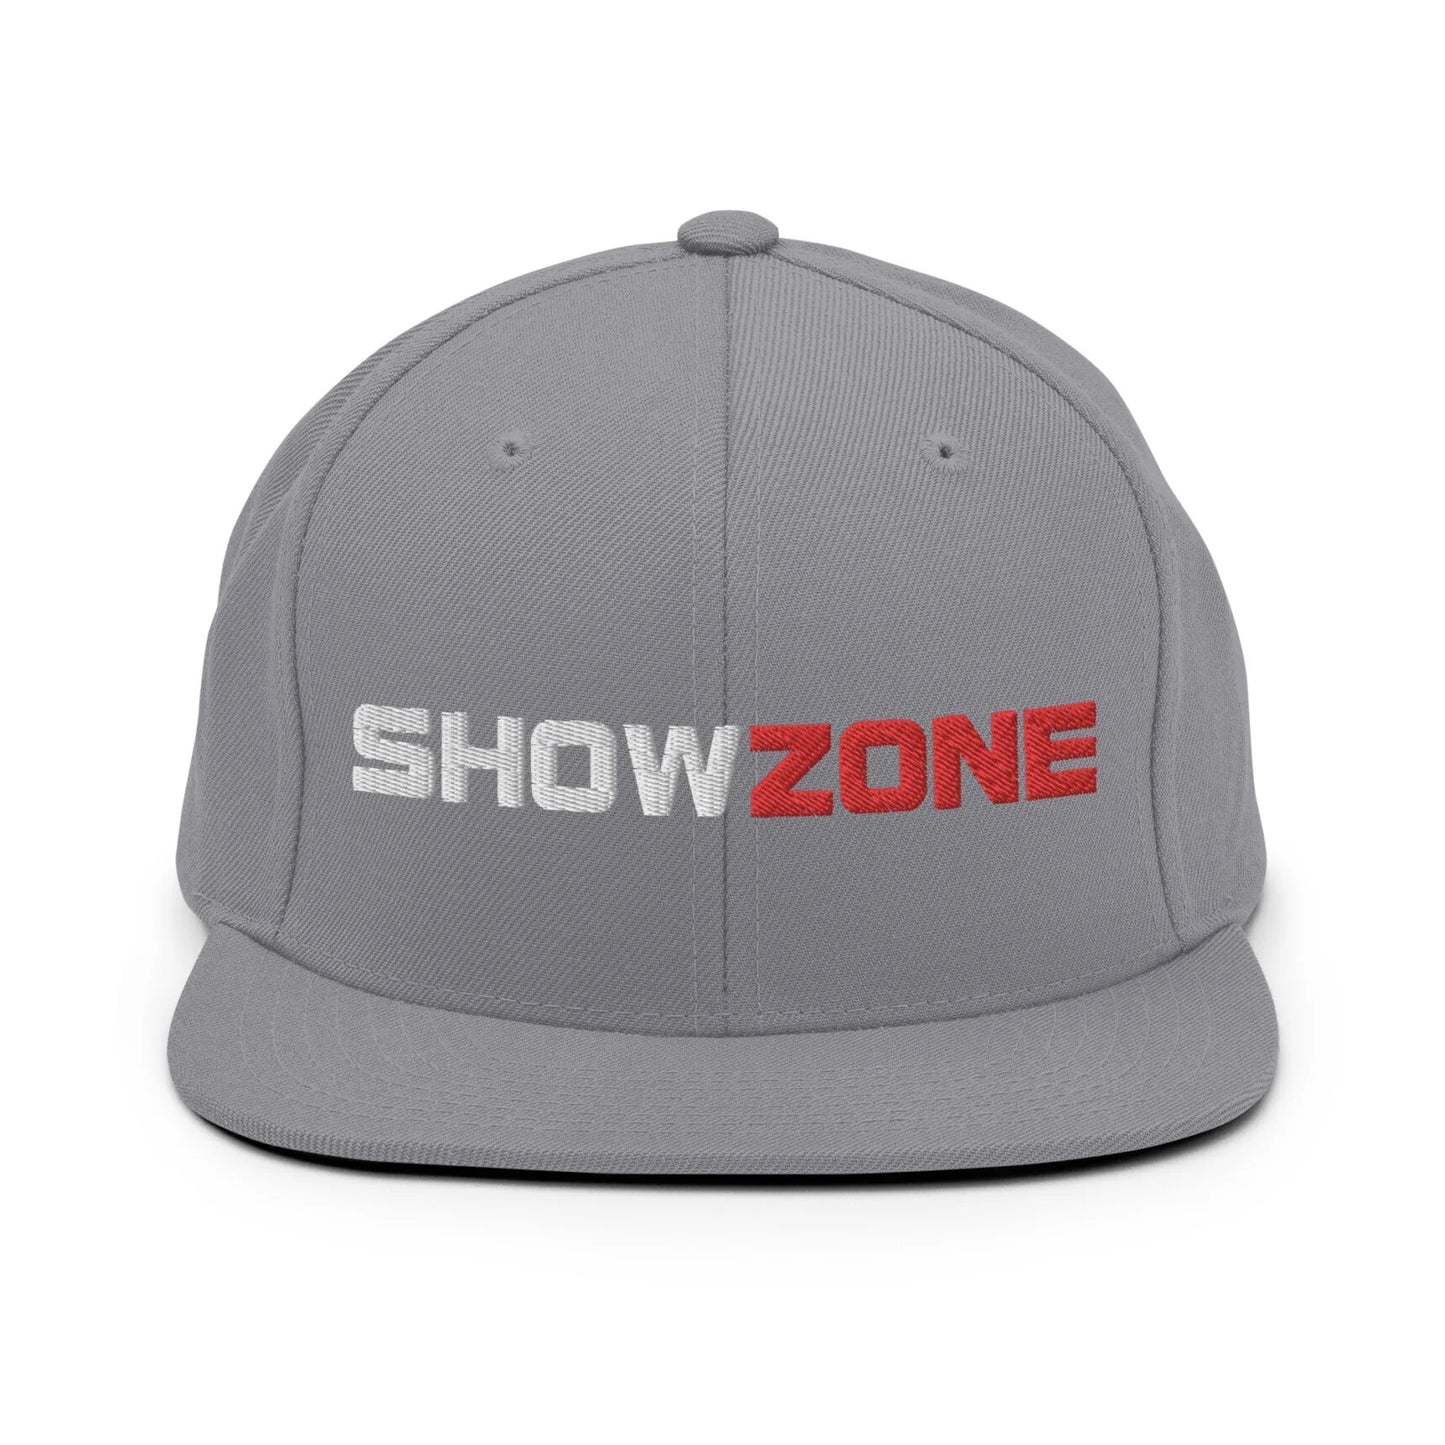 ShowZone snapback hat in grey with text logo